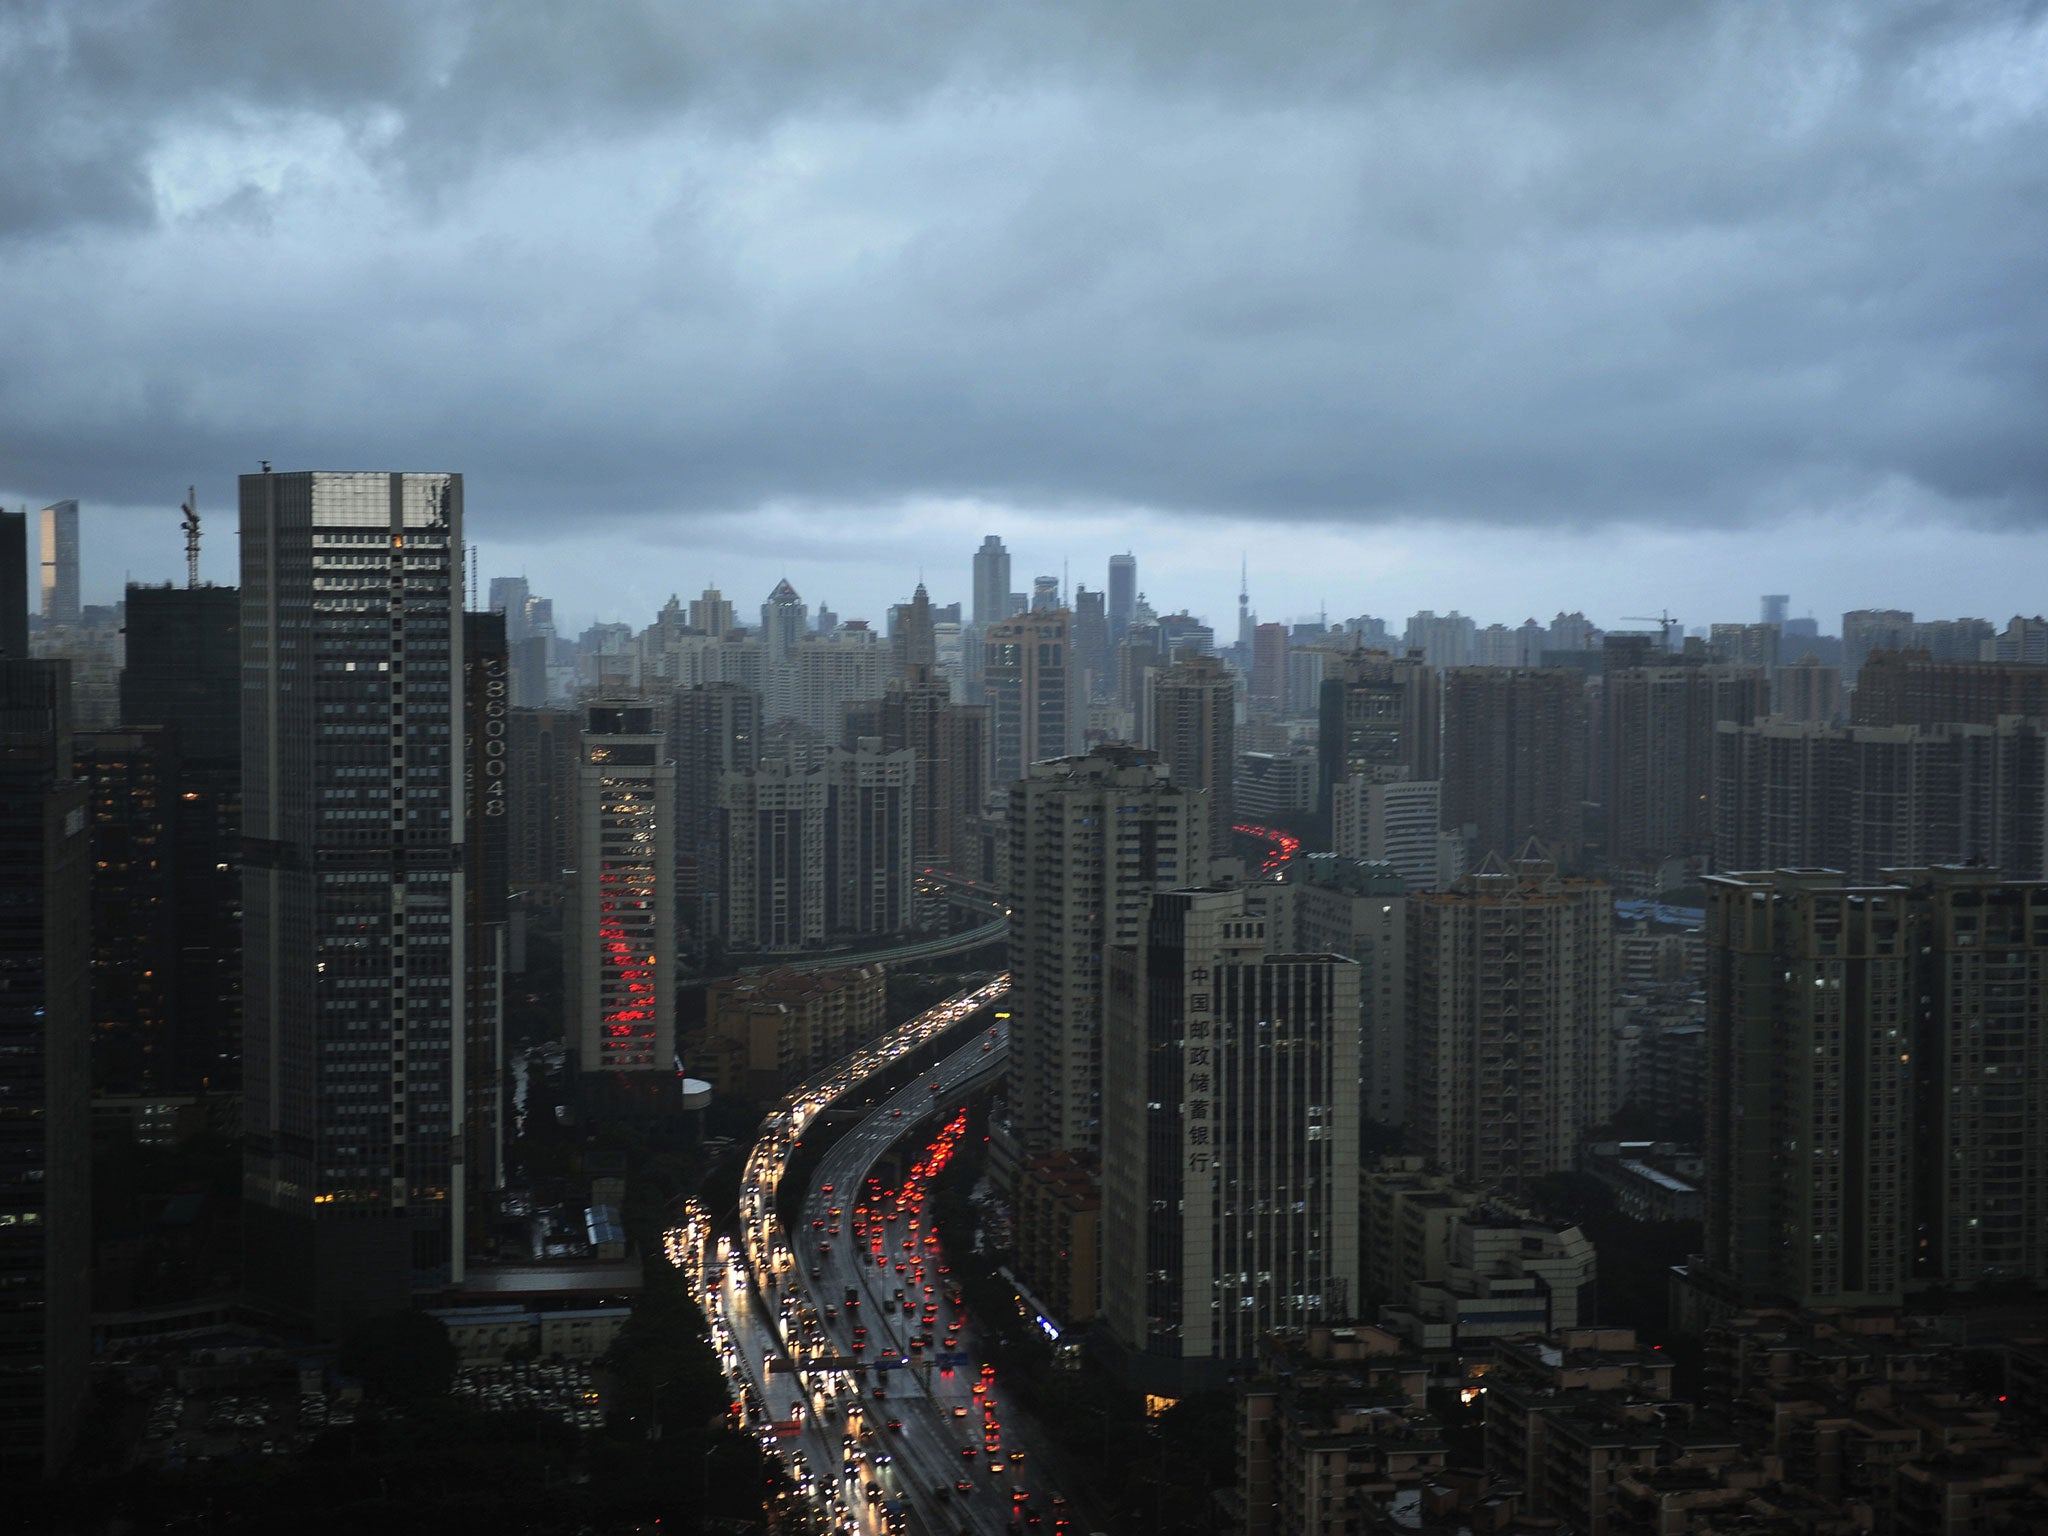 Guangzhou, Guangdong Province of China, where a motorway was built around an apartment complex.